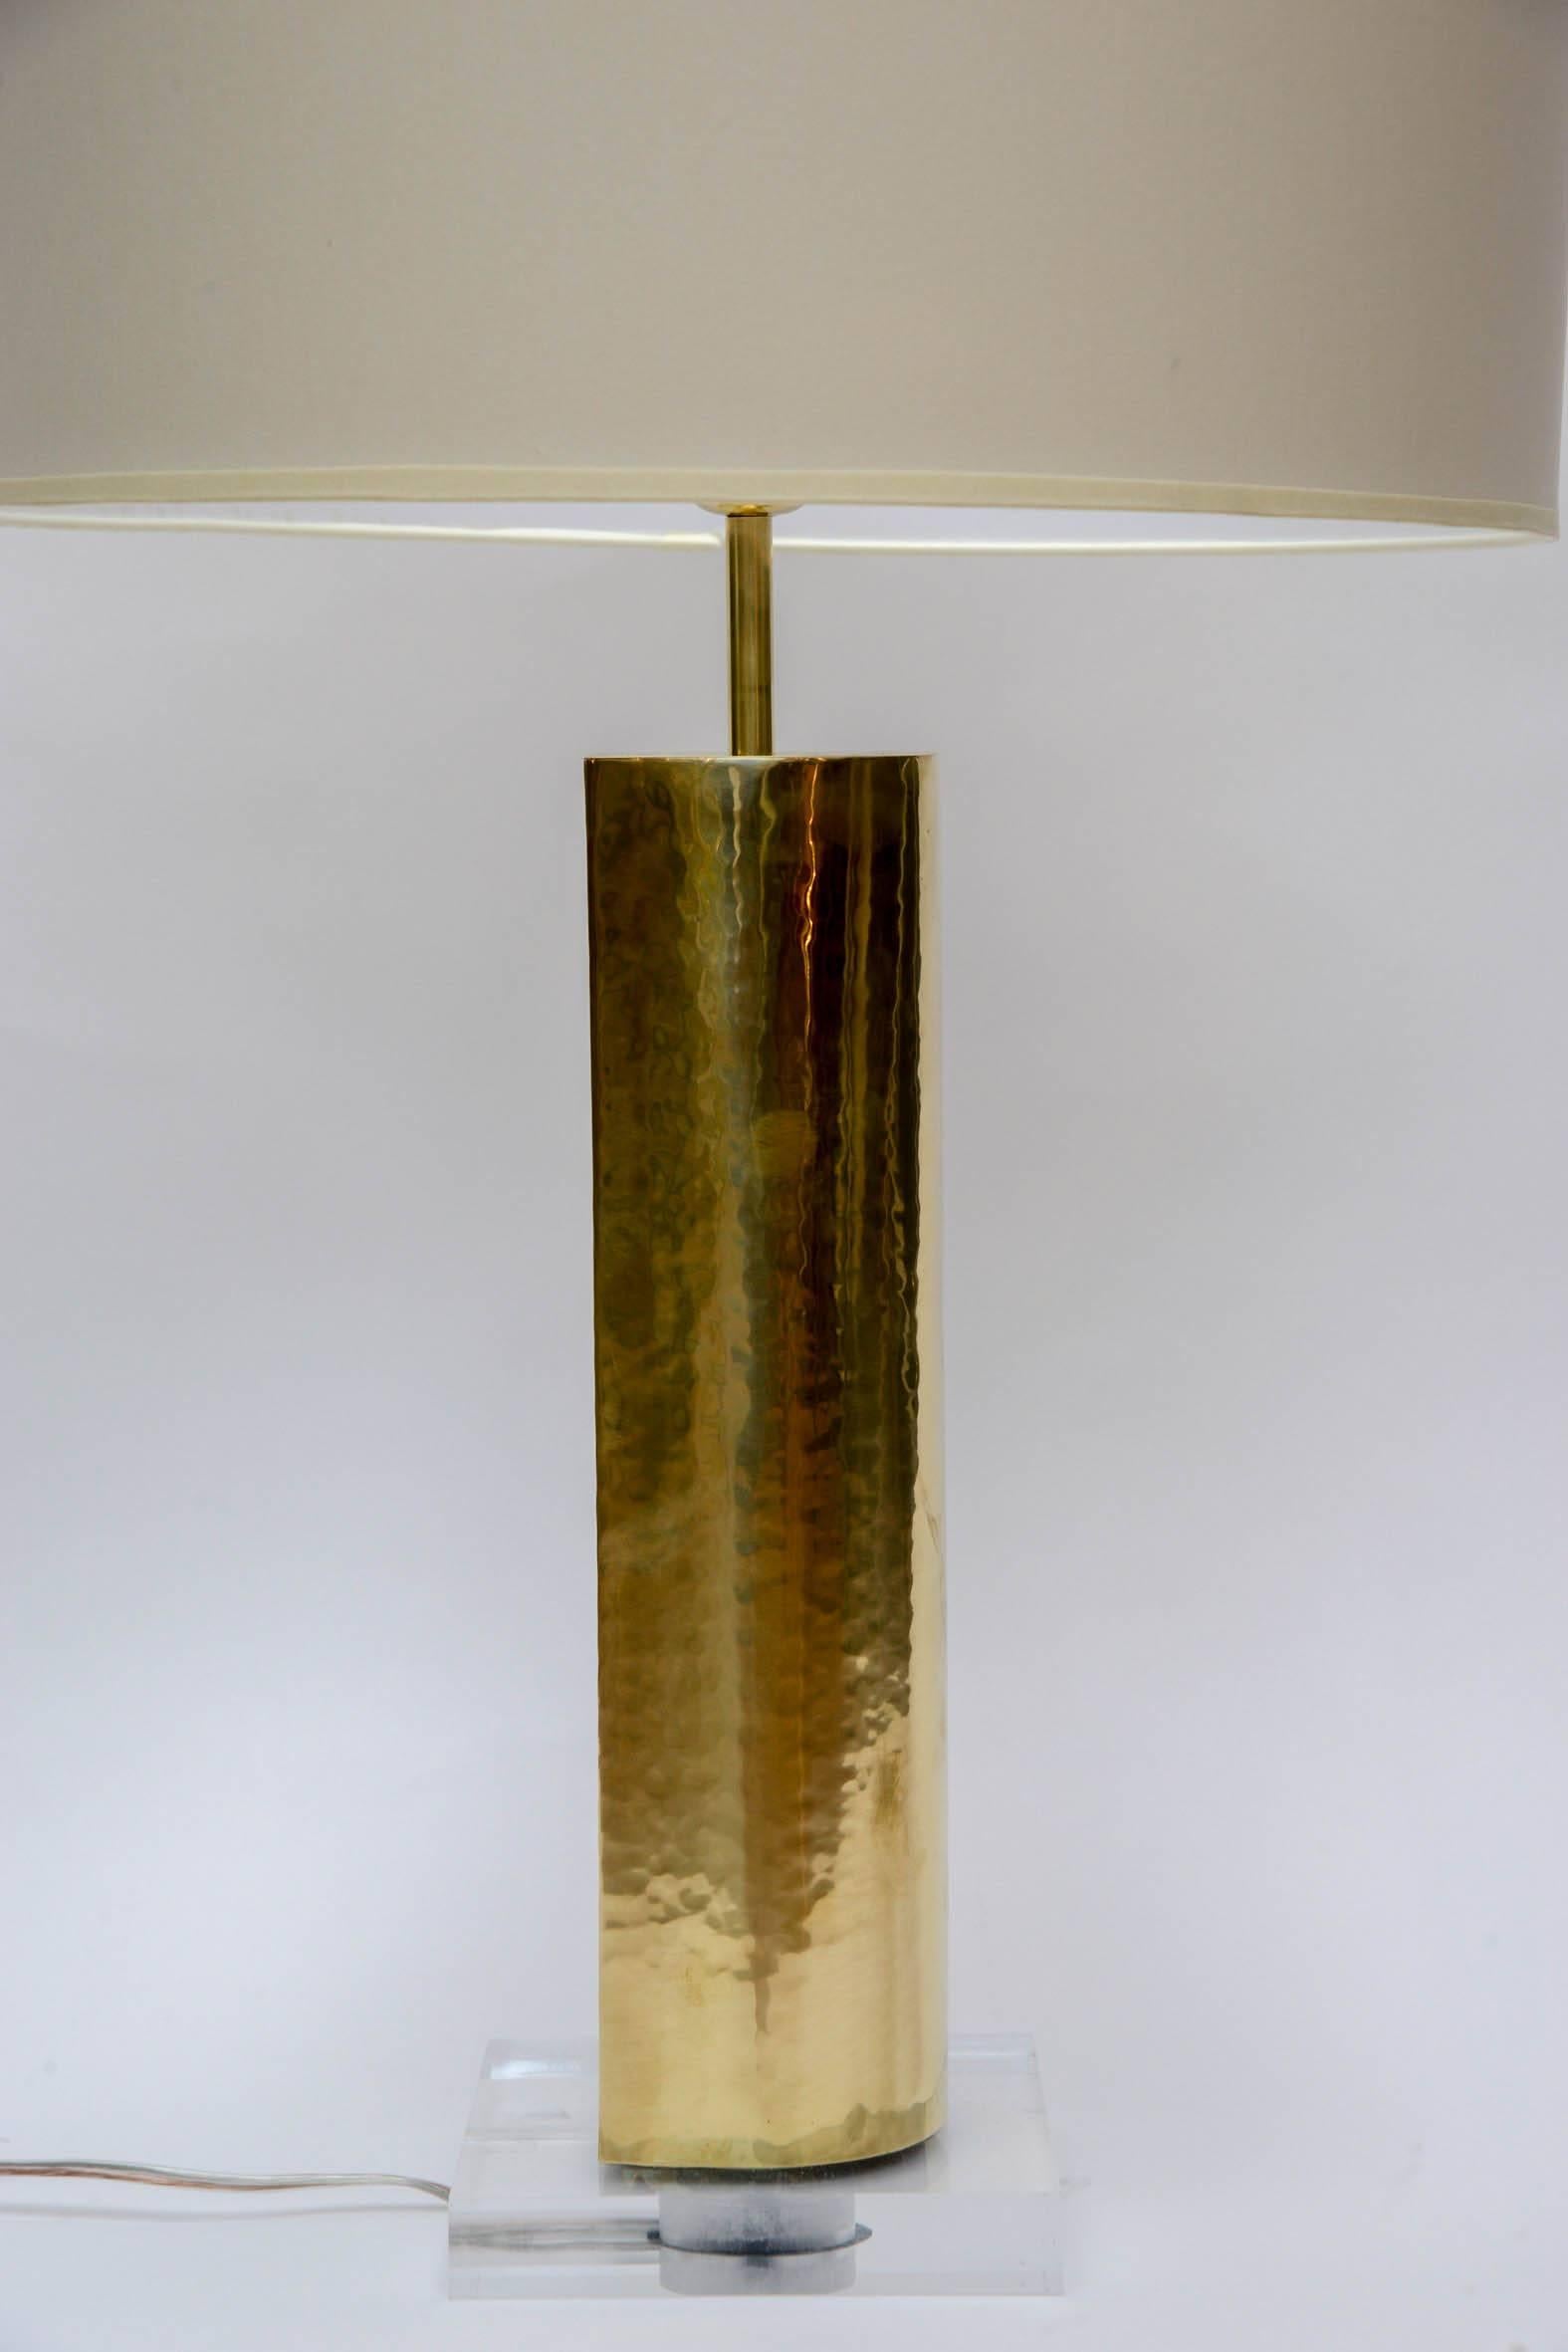 Elegant pair of lamps made of plexiglass feet and hammered brass body.

Shaped as a square, one angle is rounded giving the lamps a different shape depending how you look at it and also change the light's reflexion.